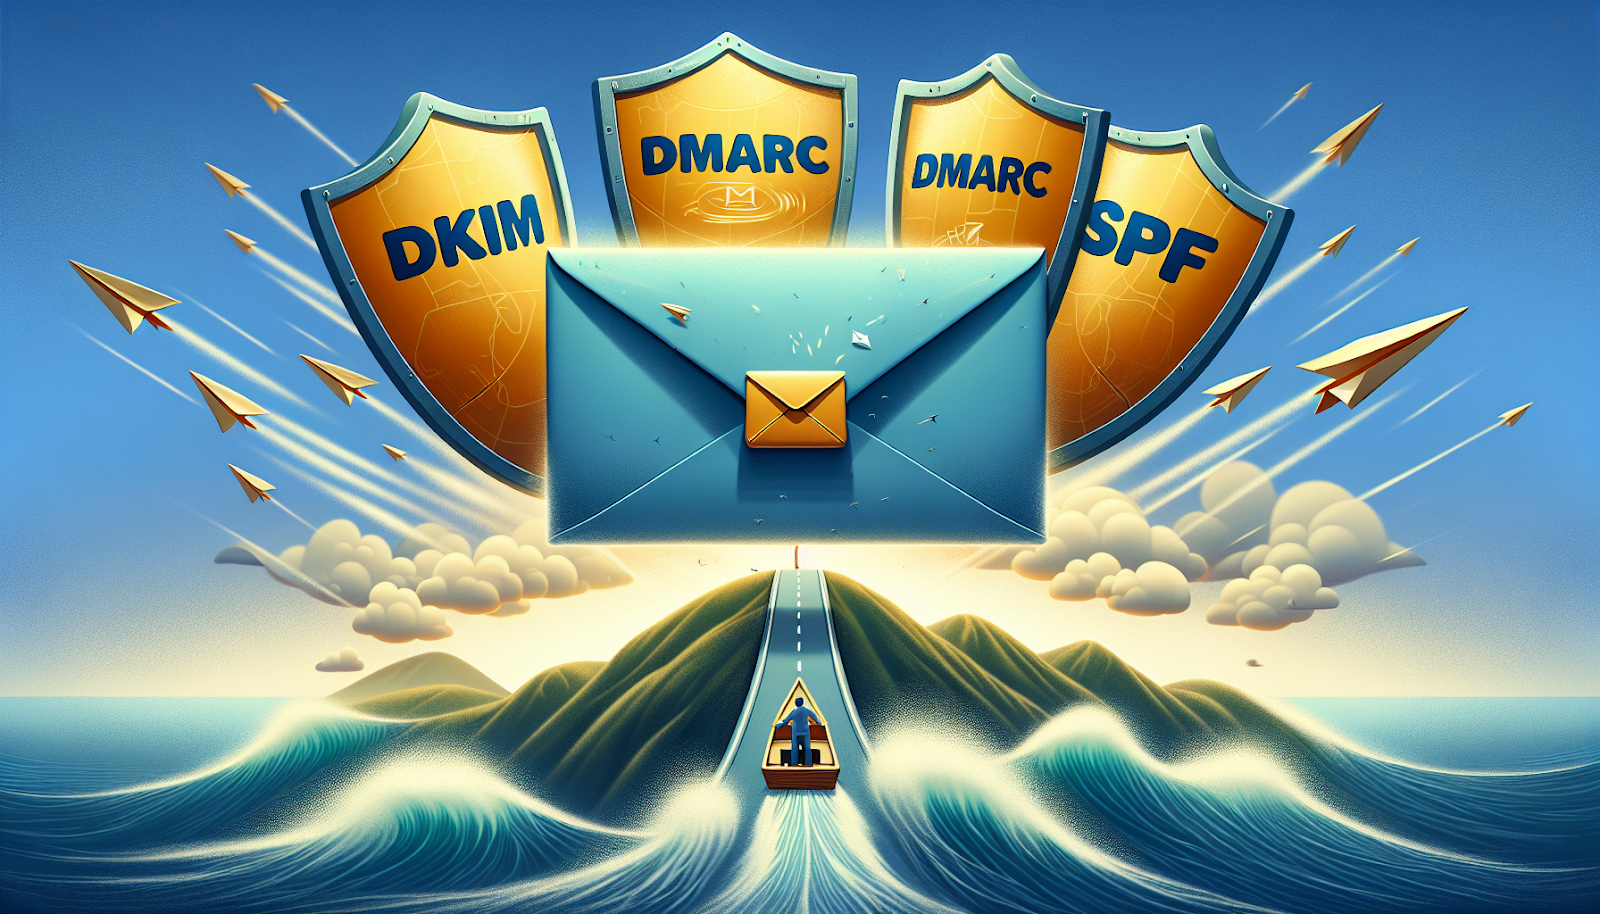 Combining DKIM, DMARC, and SPF